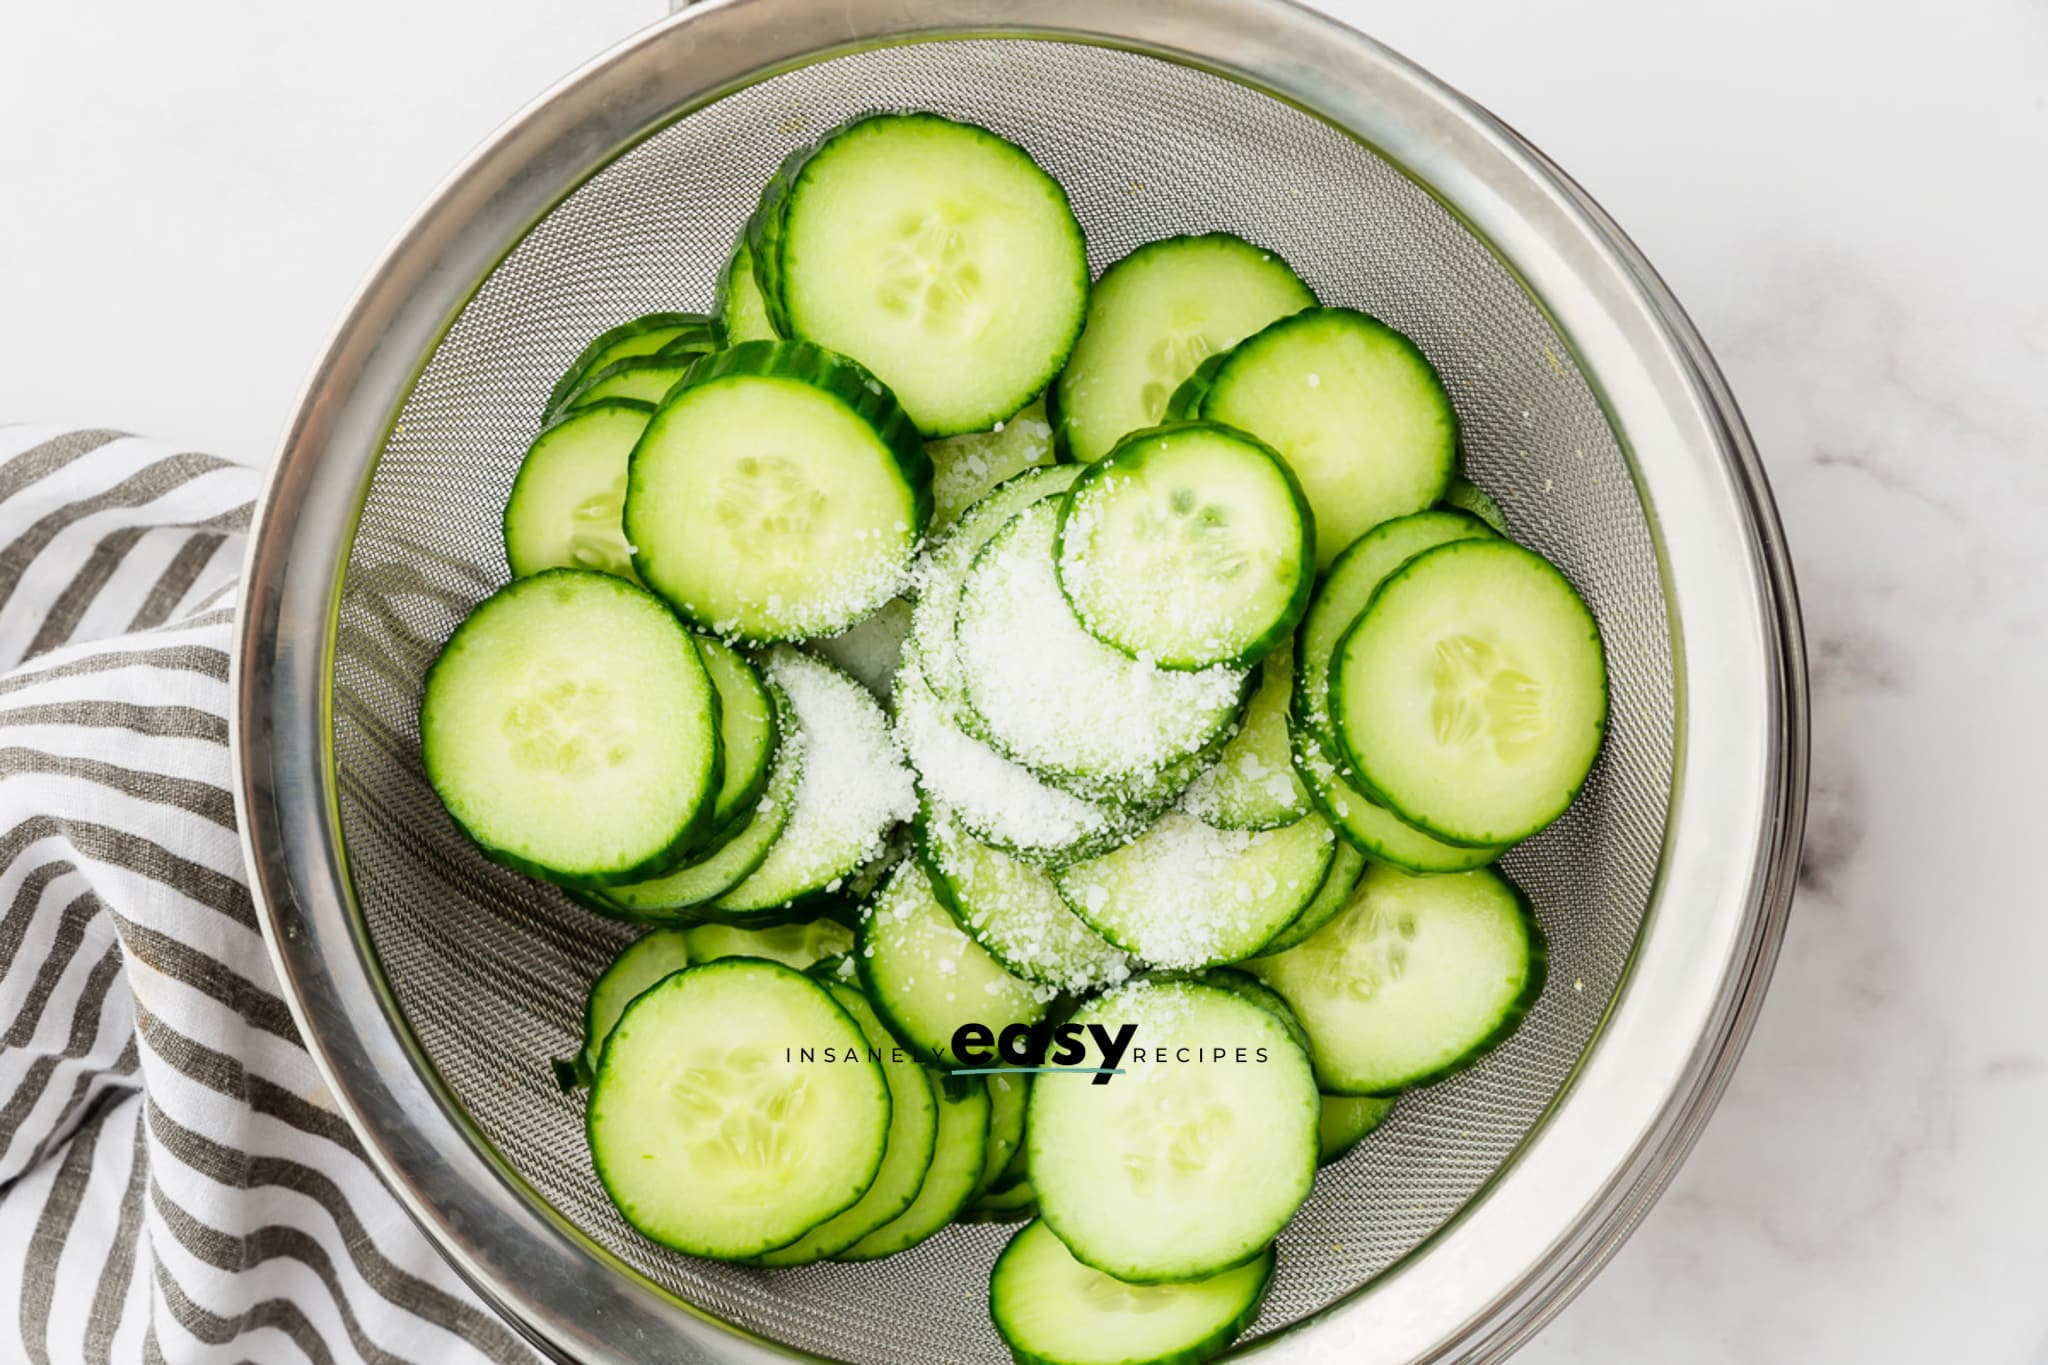 Salted cucumber slices in a mesh sieve, draining.